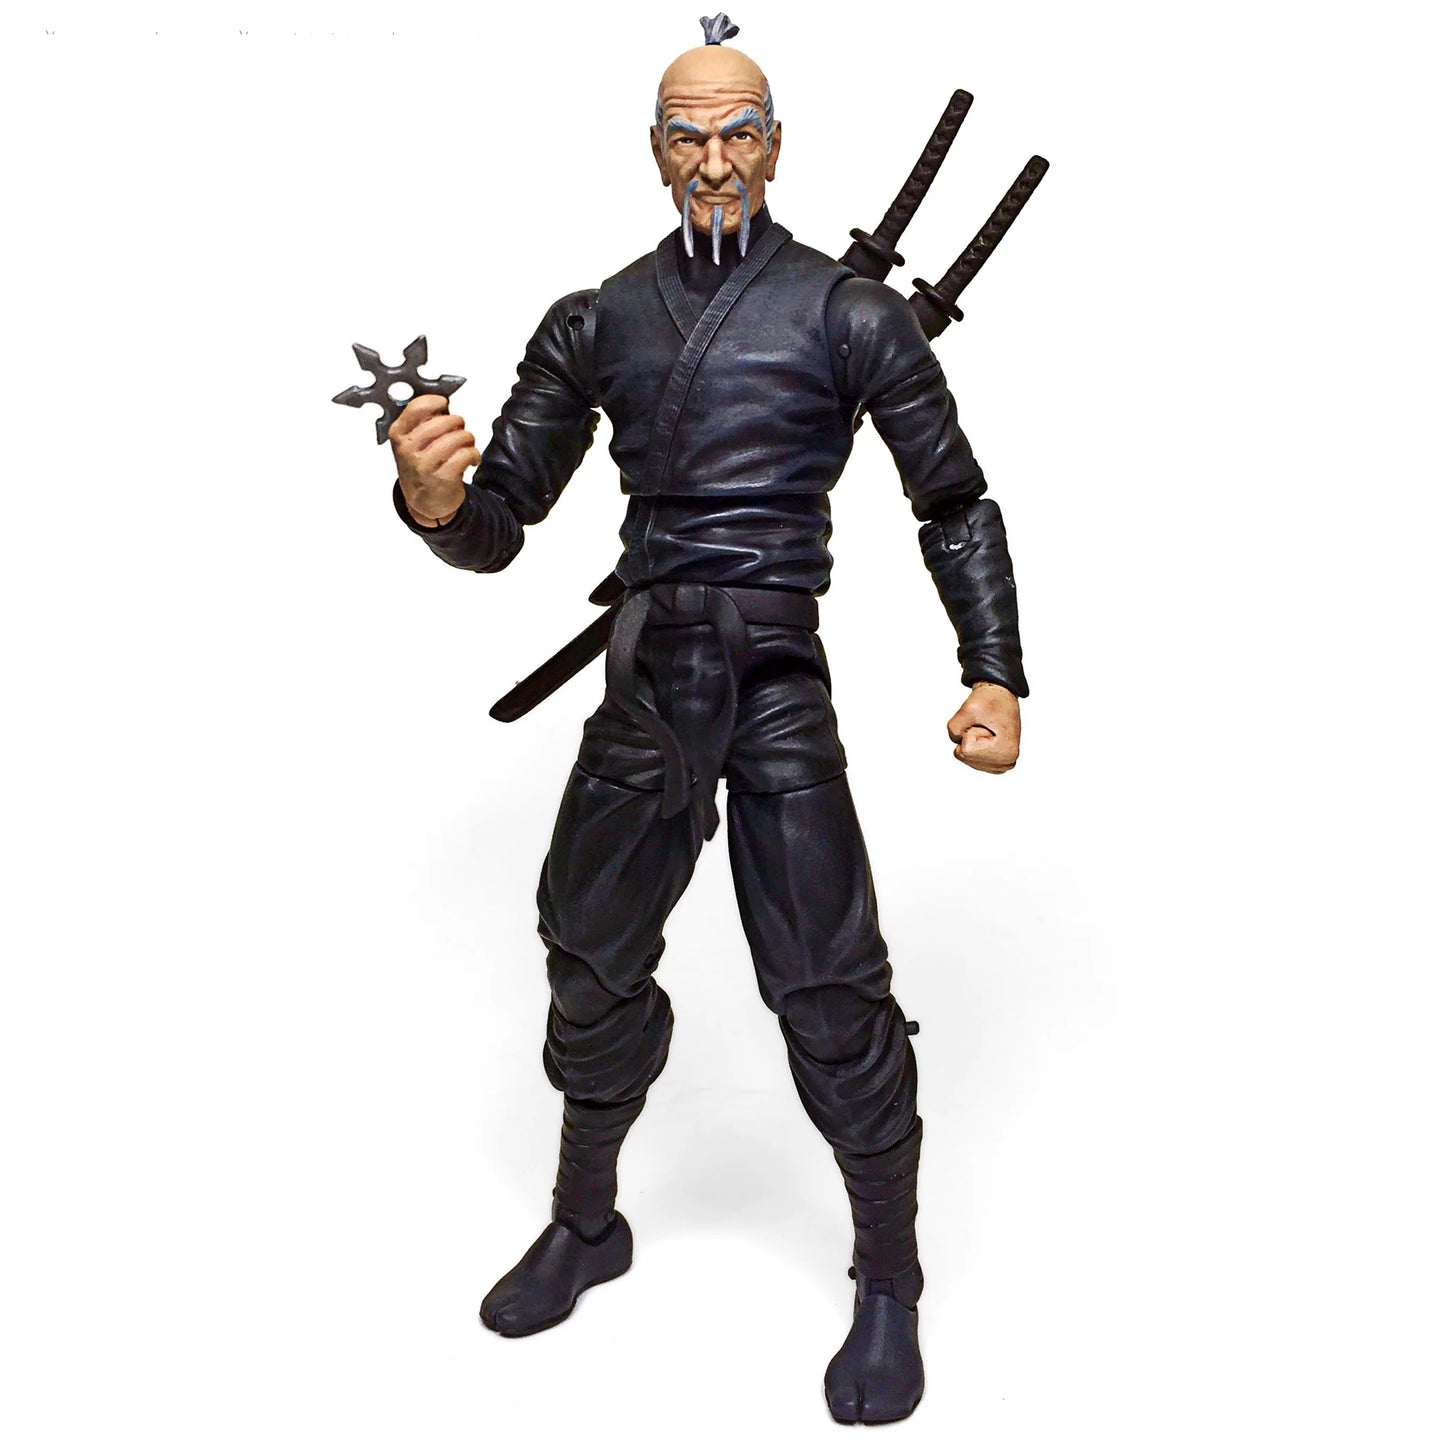 Articulated Icons- The Feudal Series - Deluxe Ninja (Black)